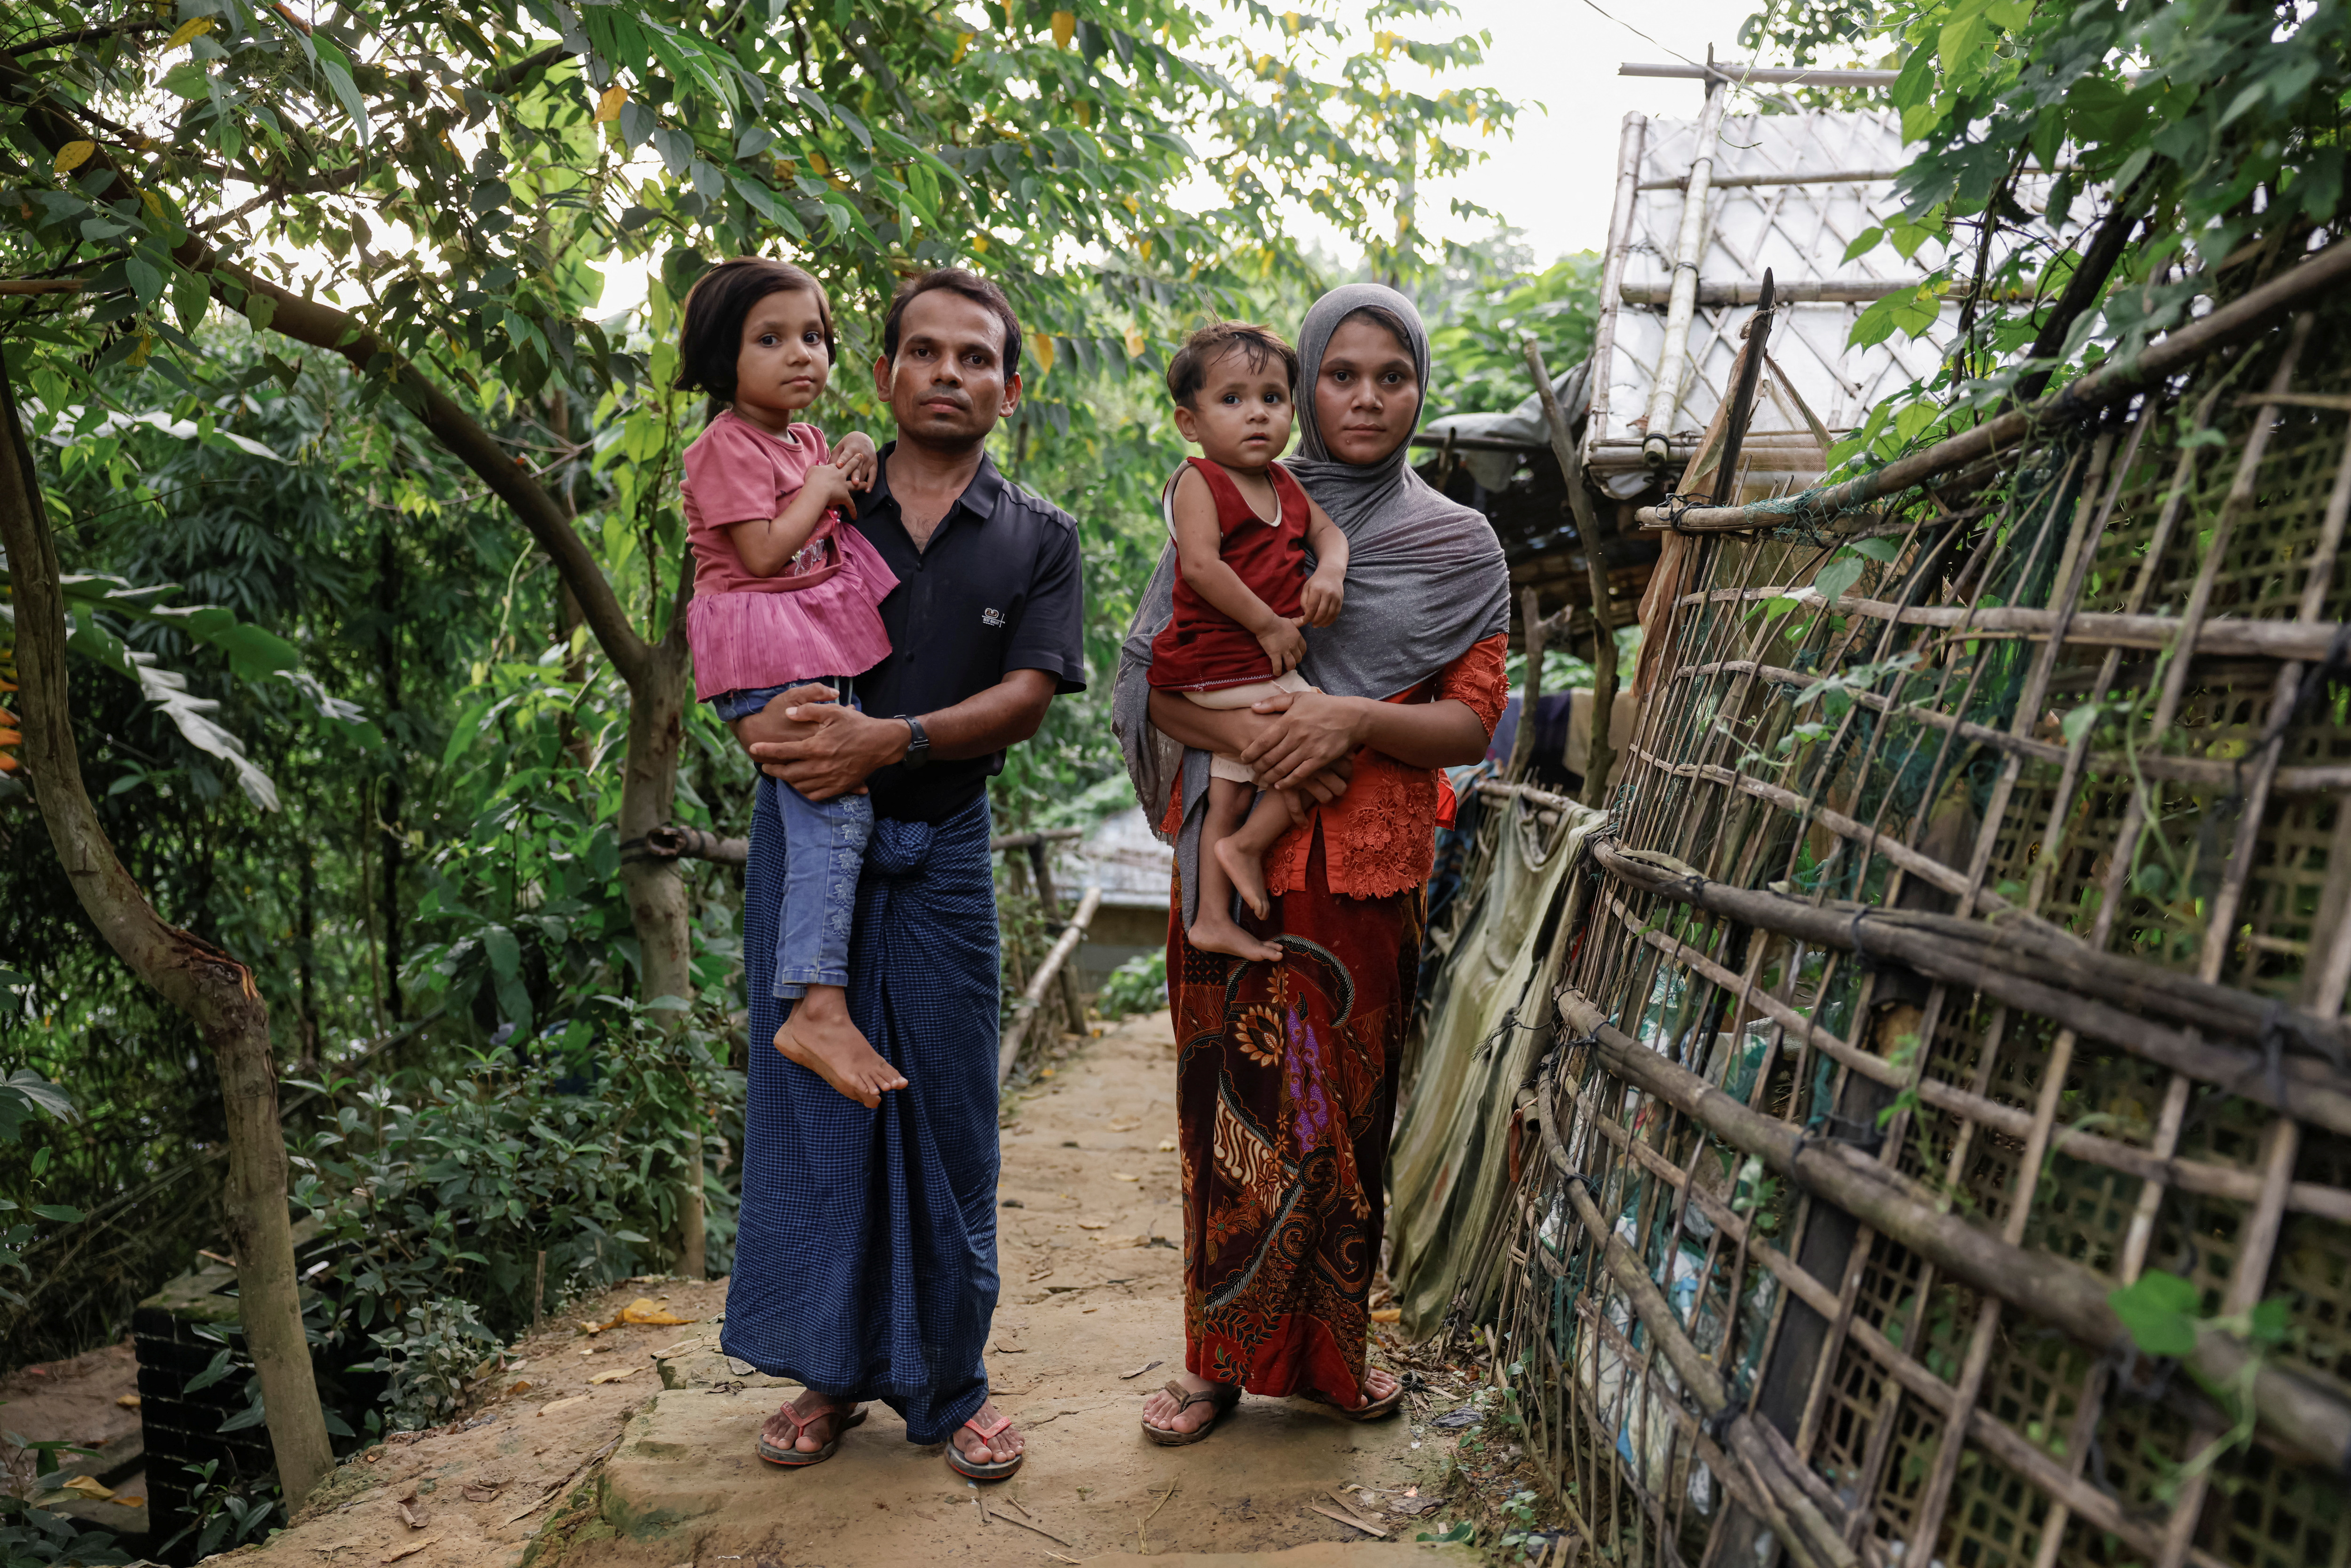 Saifur Rahman and his family, who said they fled from Buthidaung to Bangladesh, pose for a picture at a refugee camp in Cox's Bazar